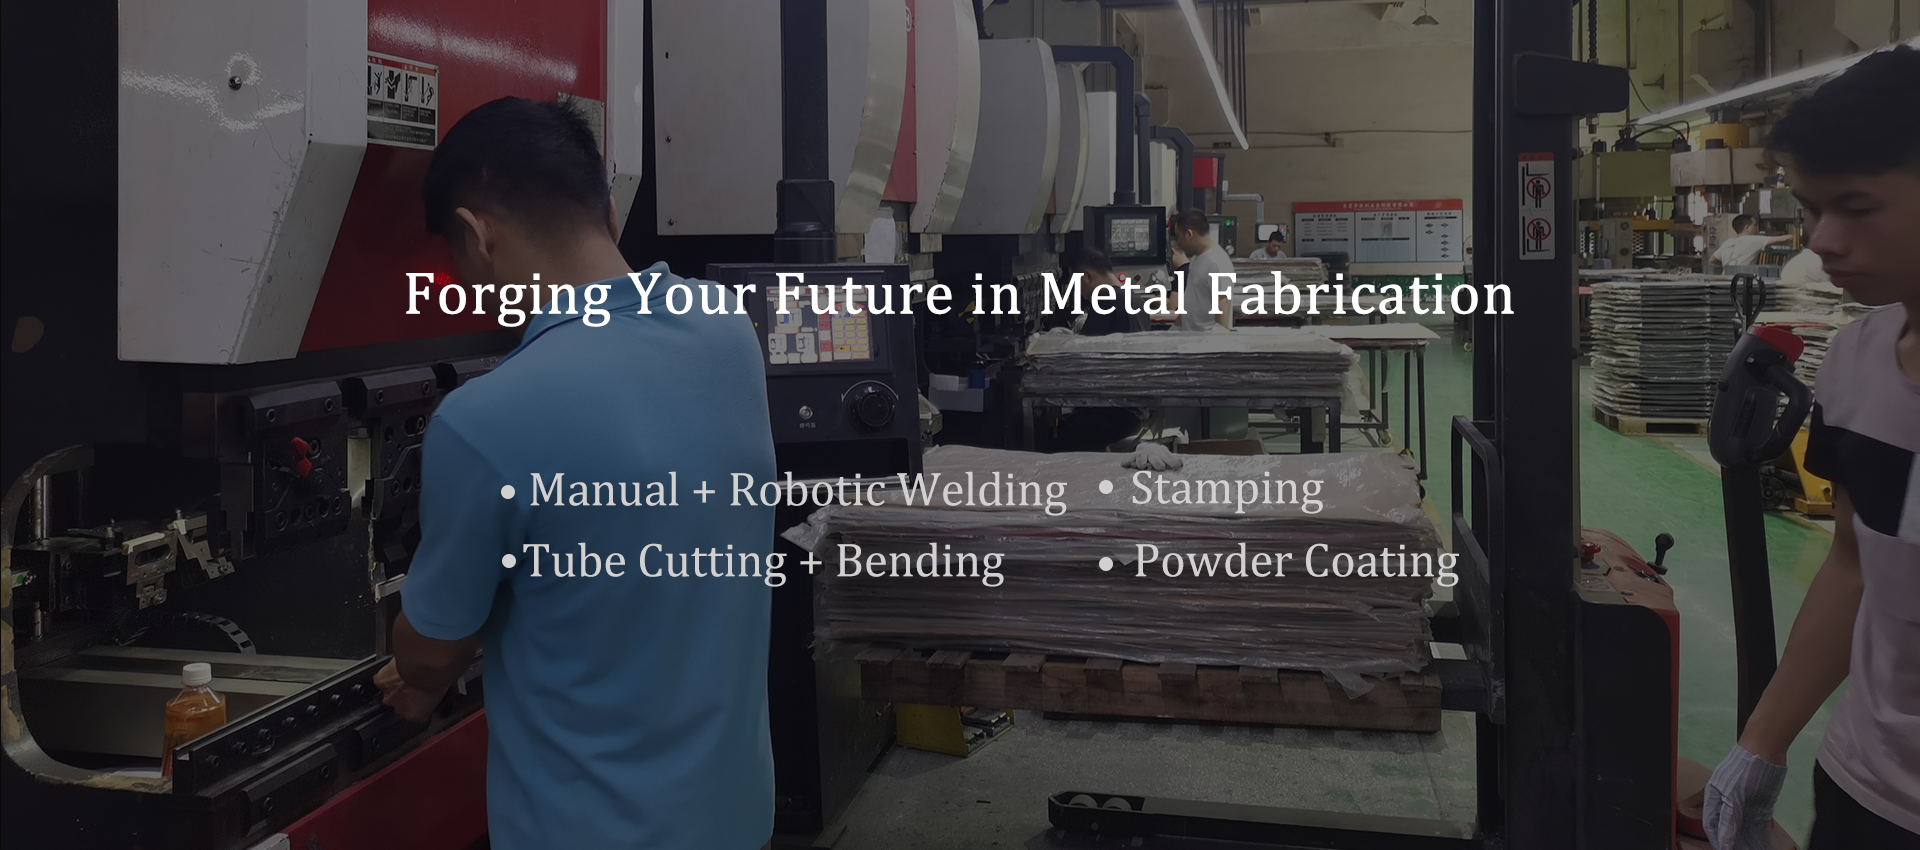 Forging Your Future in Metal Fabrication